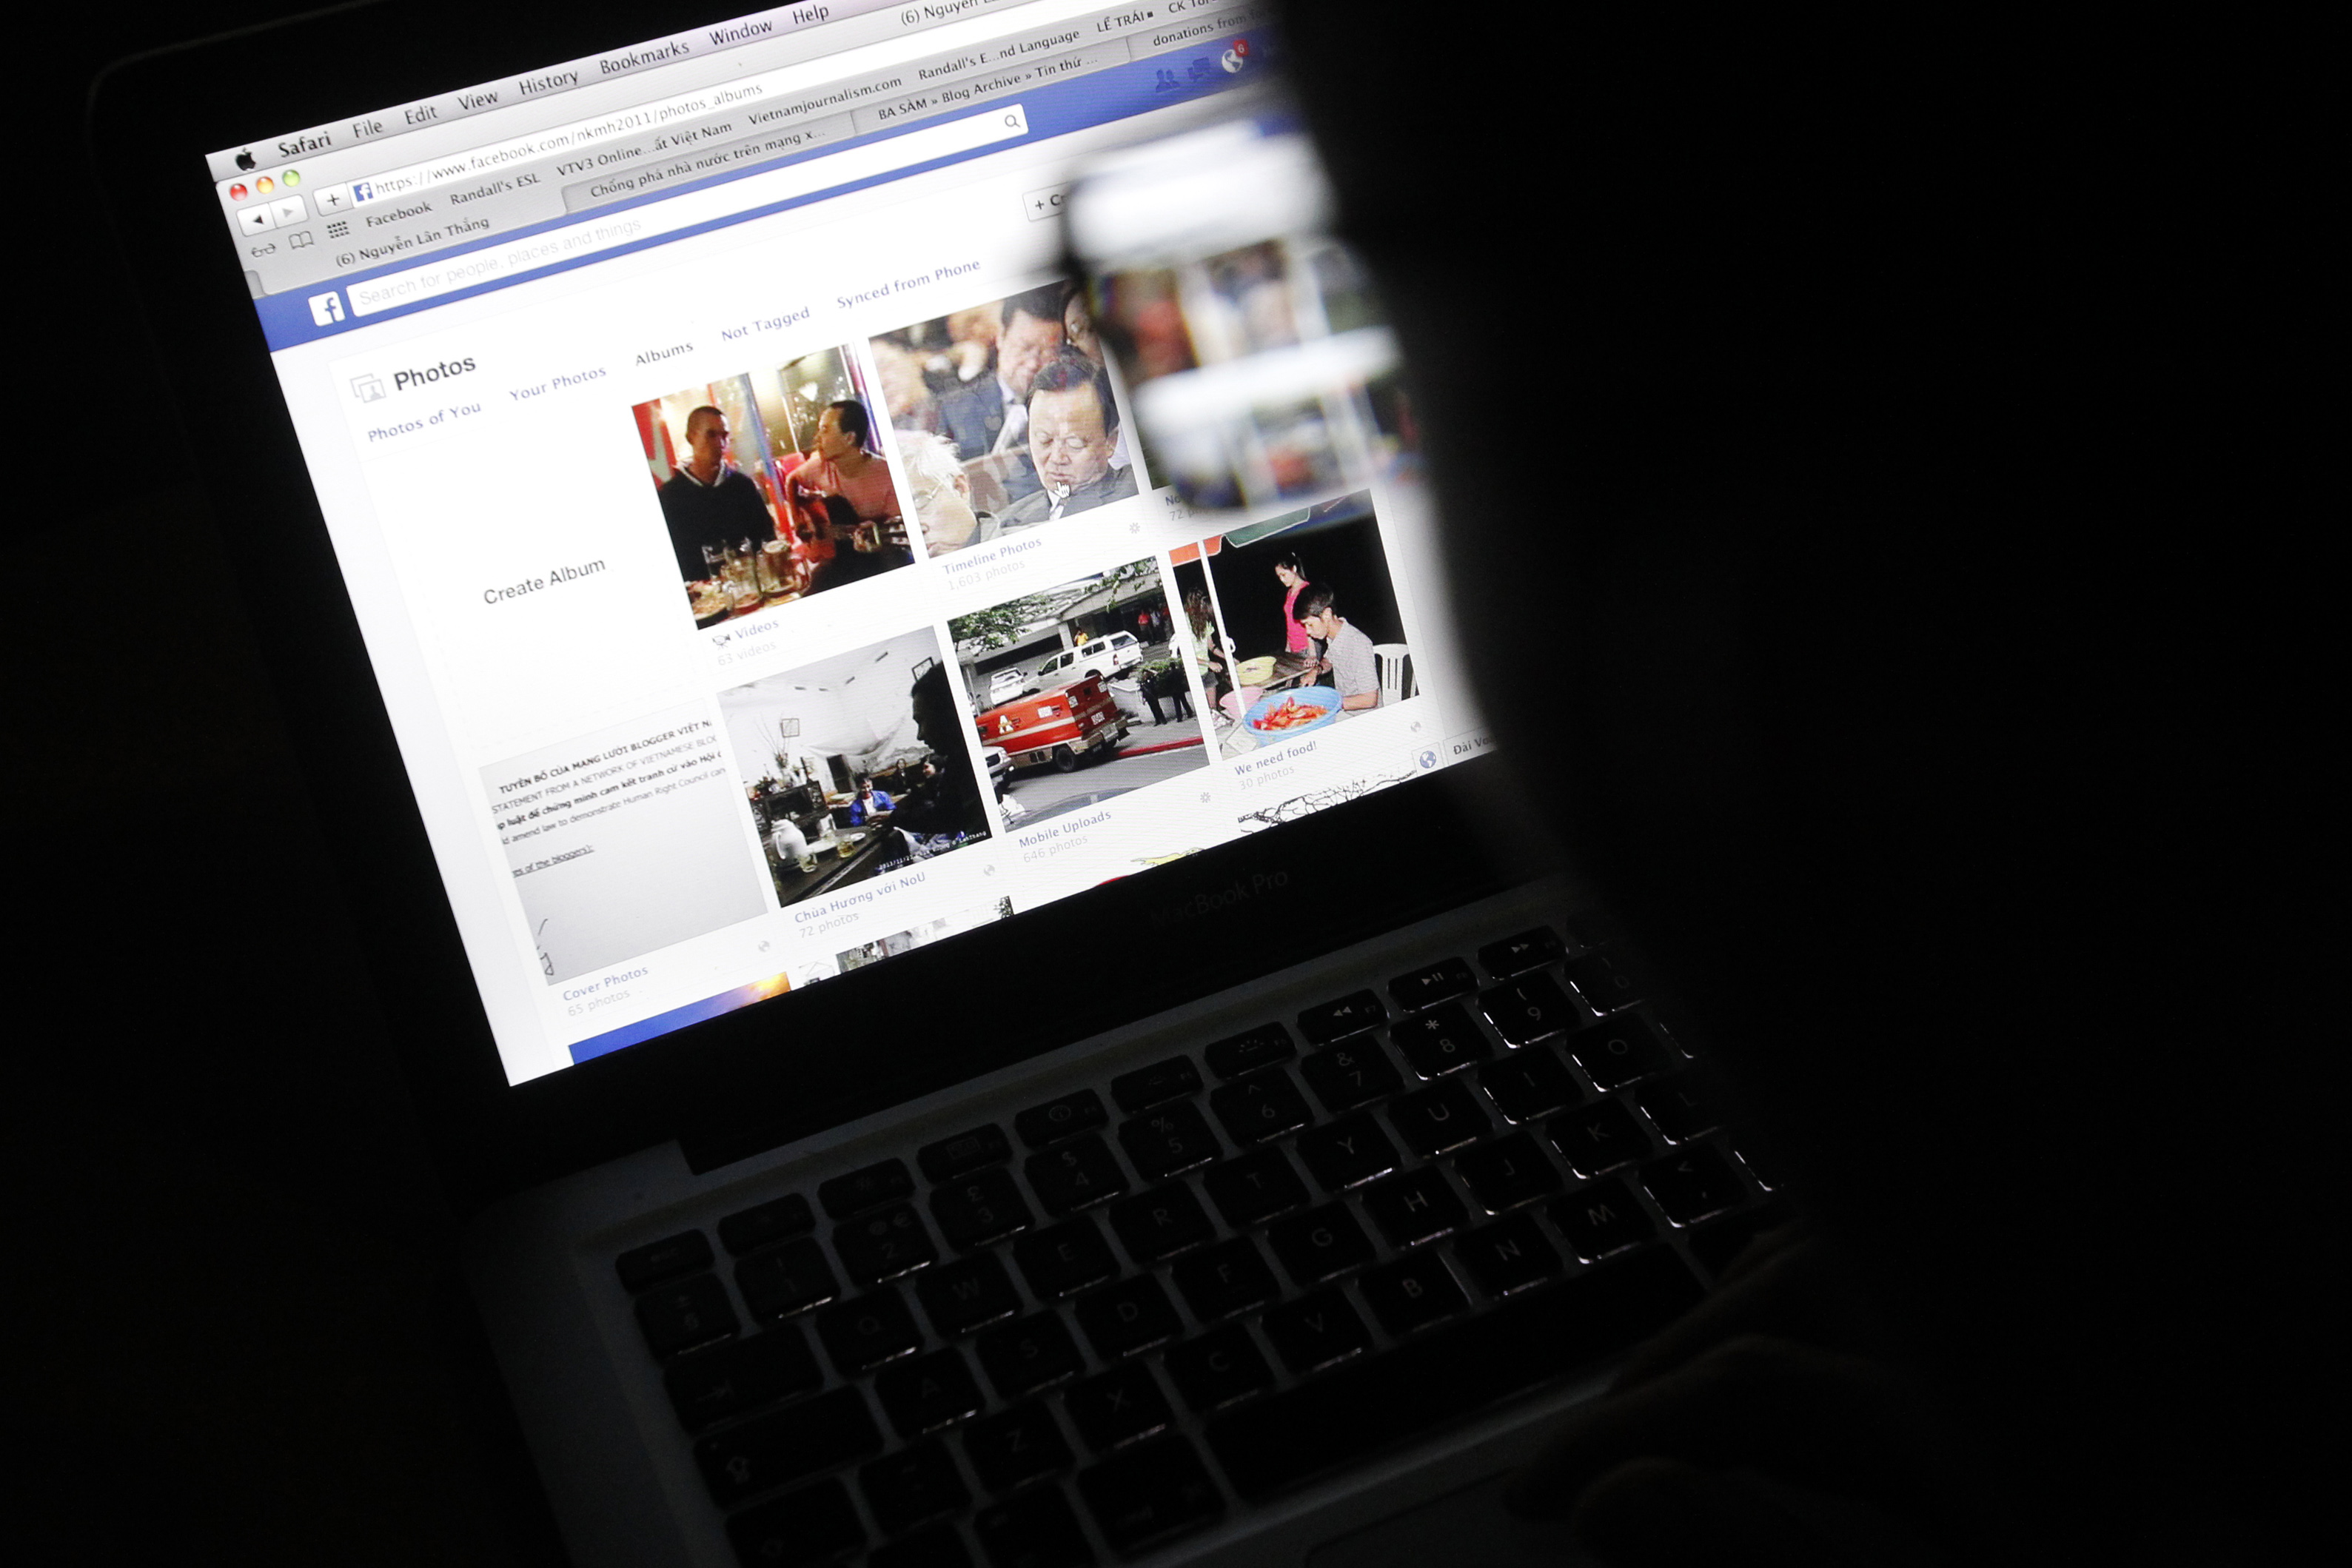 FILE -Vietnamese Internet activist Nguyen Lan Thang looks at a Facebook page at a cafe in Hanoi, Nov. 27, 2013. (Reuters)